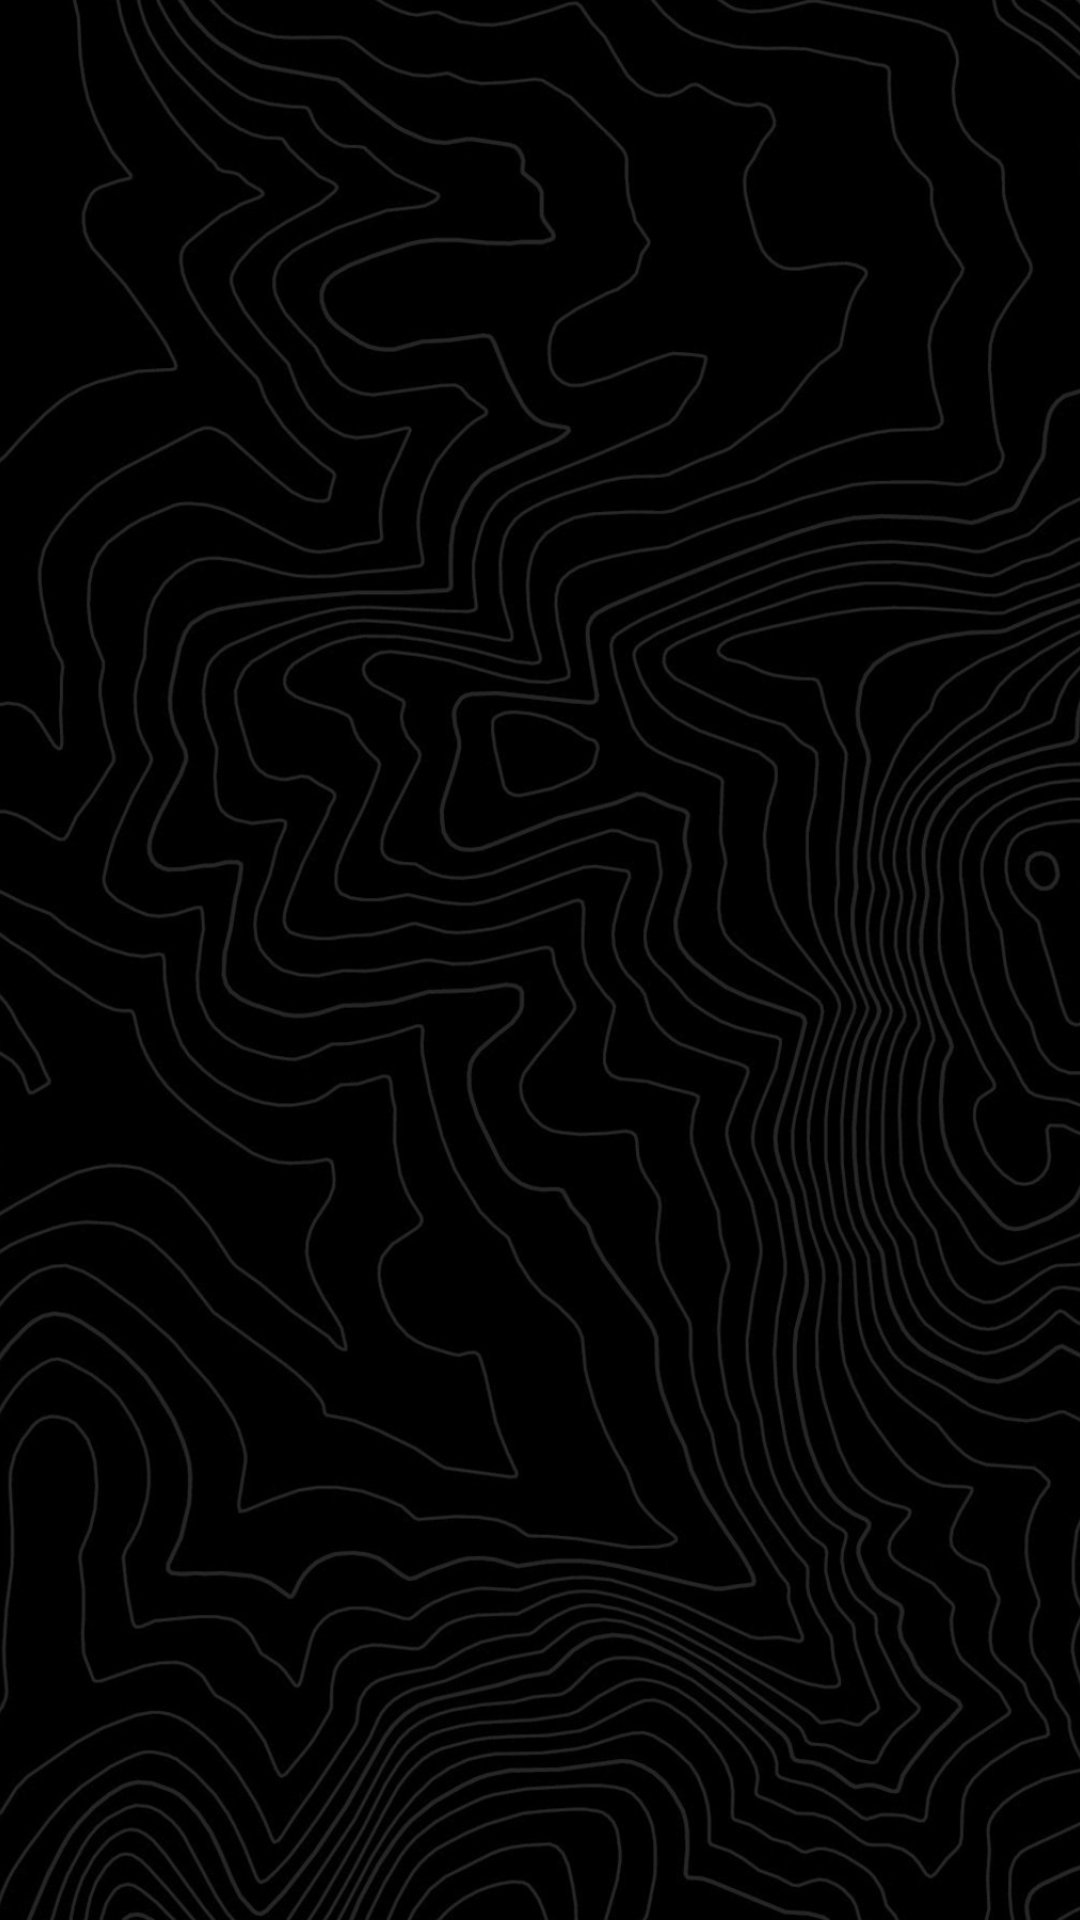 1080X1920 Topography Abstract Black Texture Iphone 7, 6S, 6 Plus And